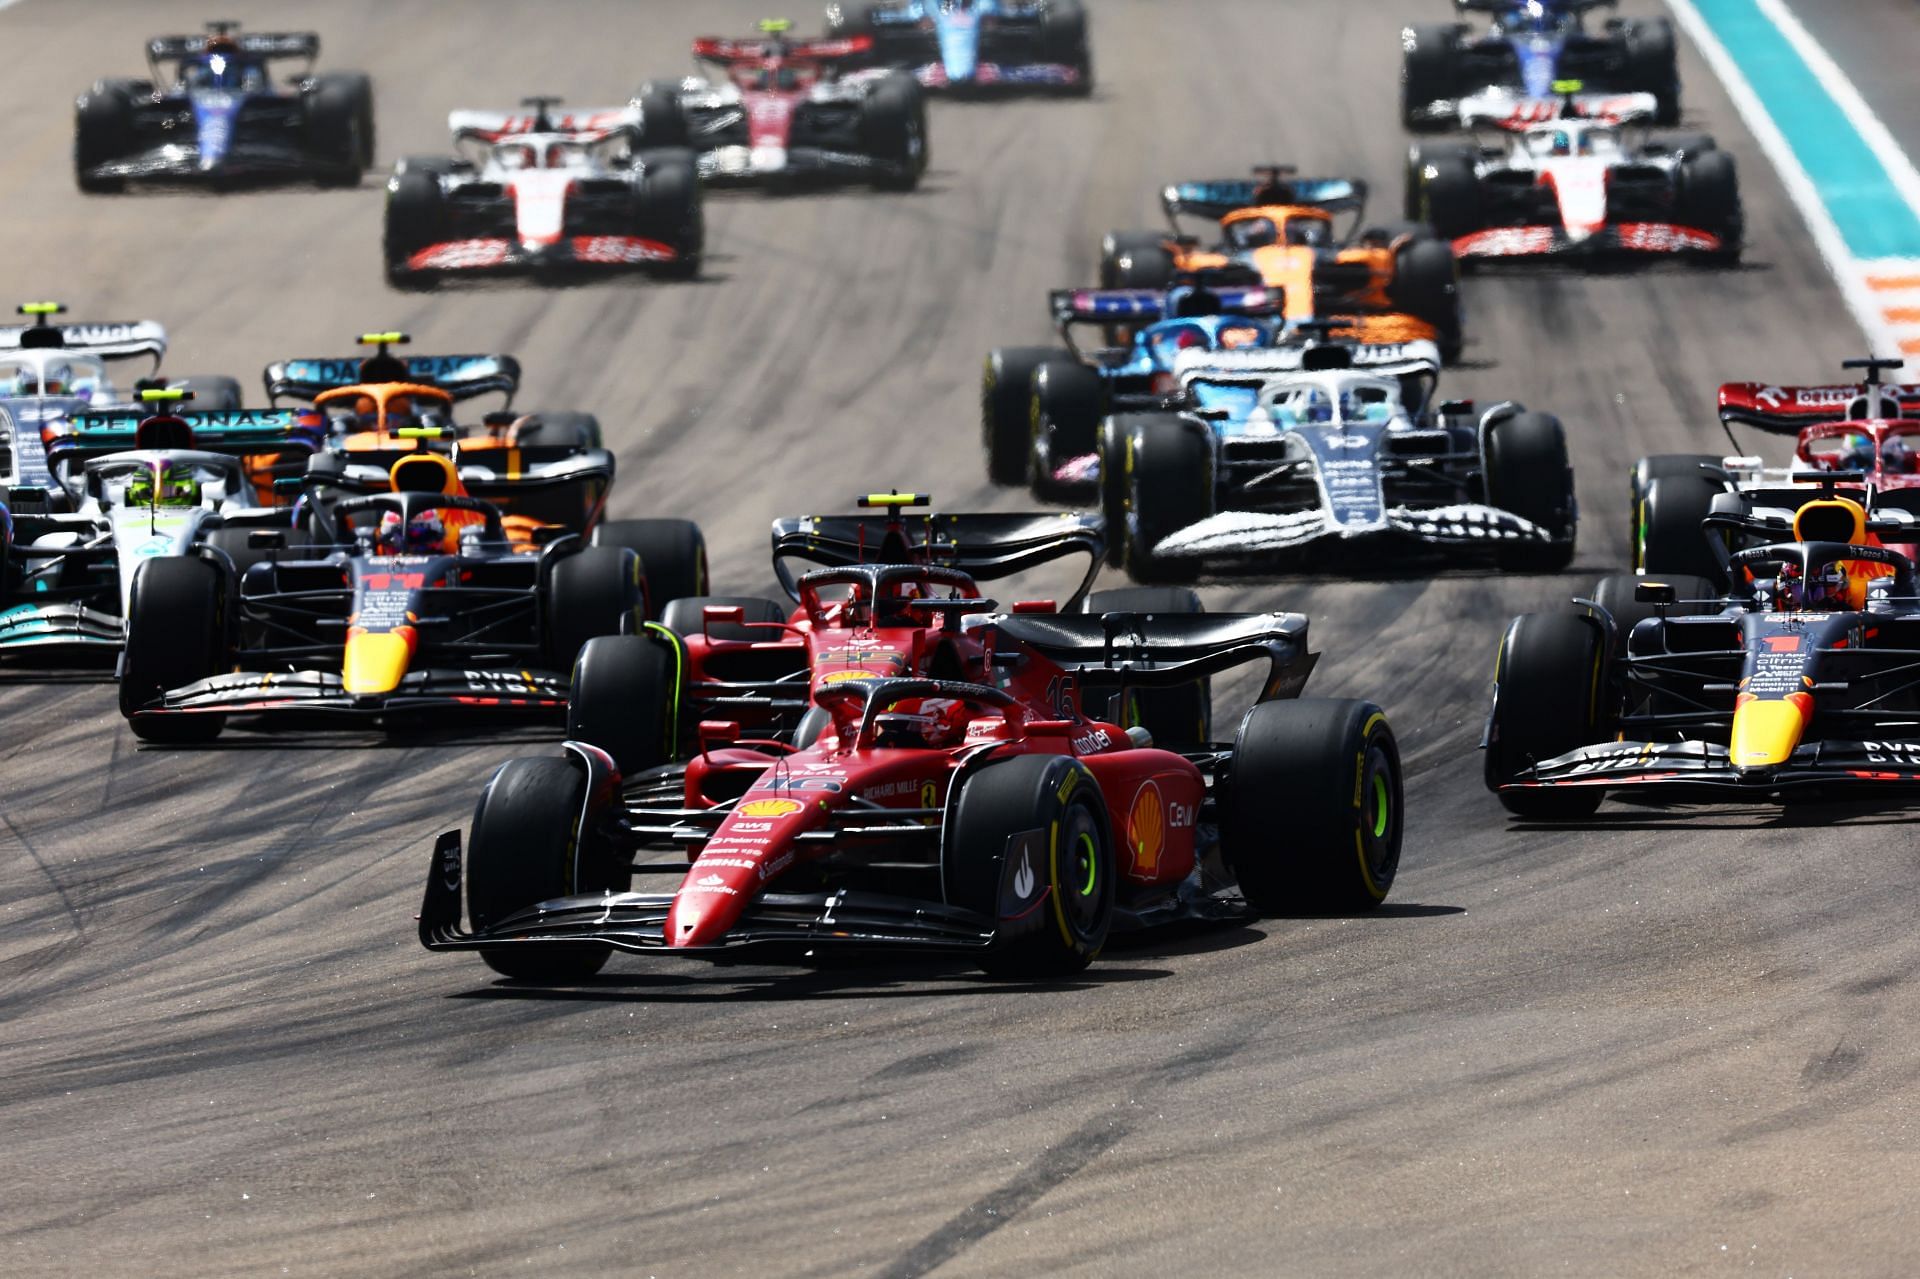 F1 Grand Prix of Miami - Charles Leclerc leads the field into turn 1